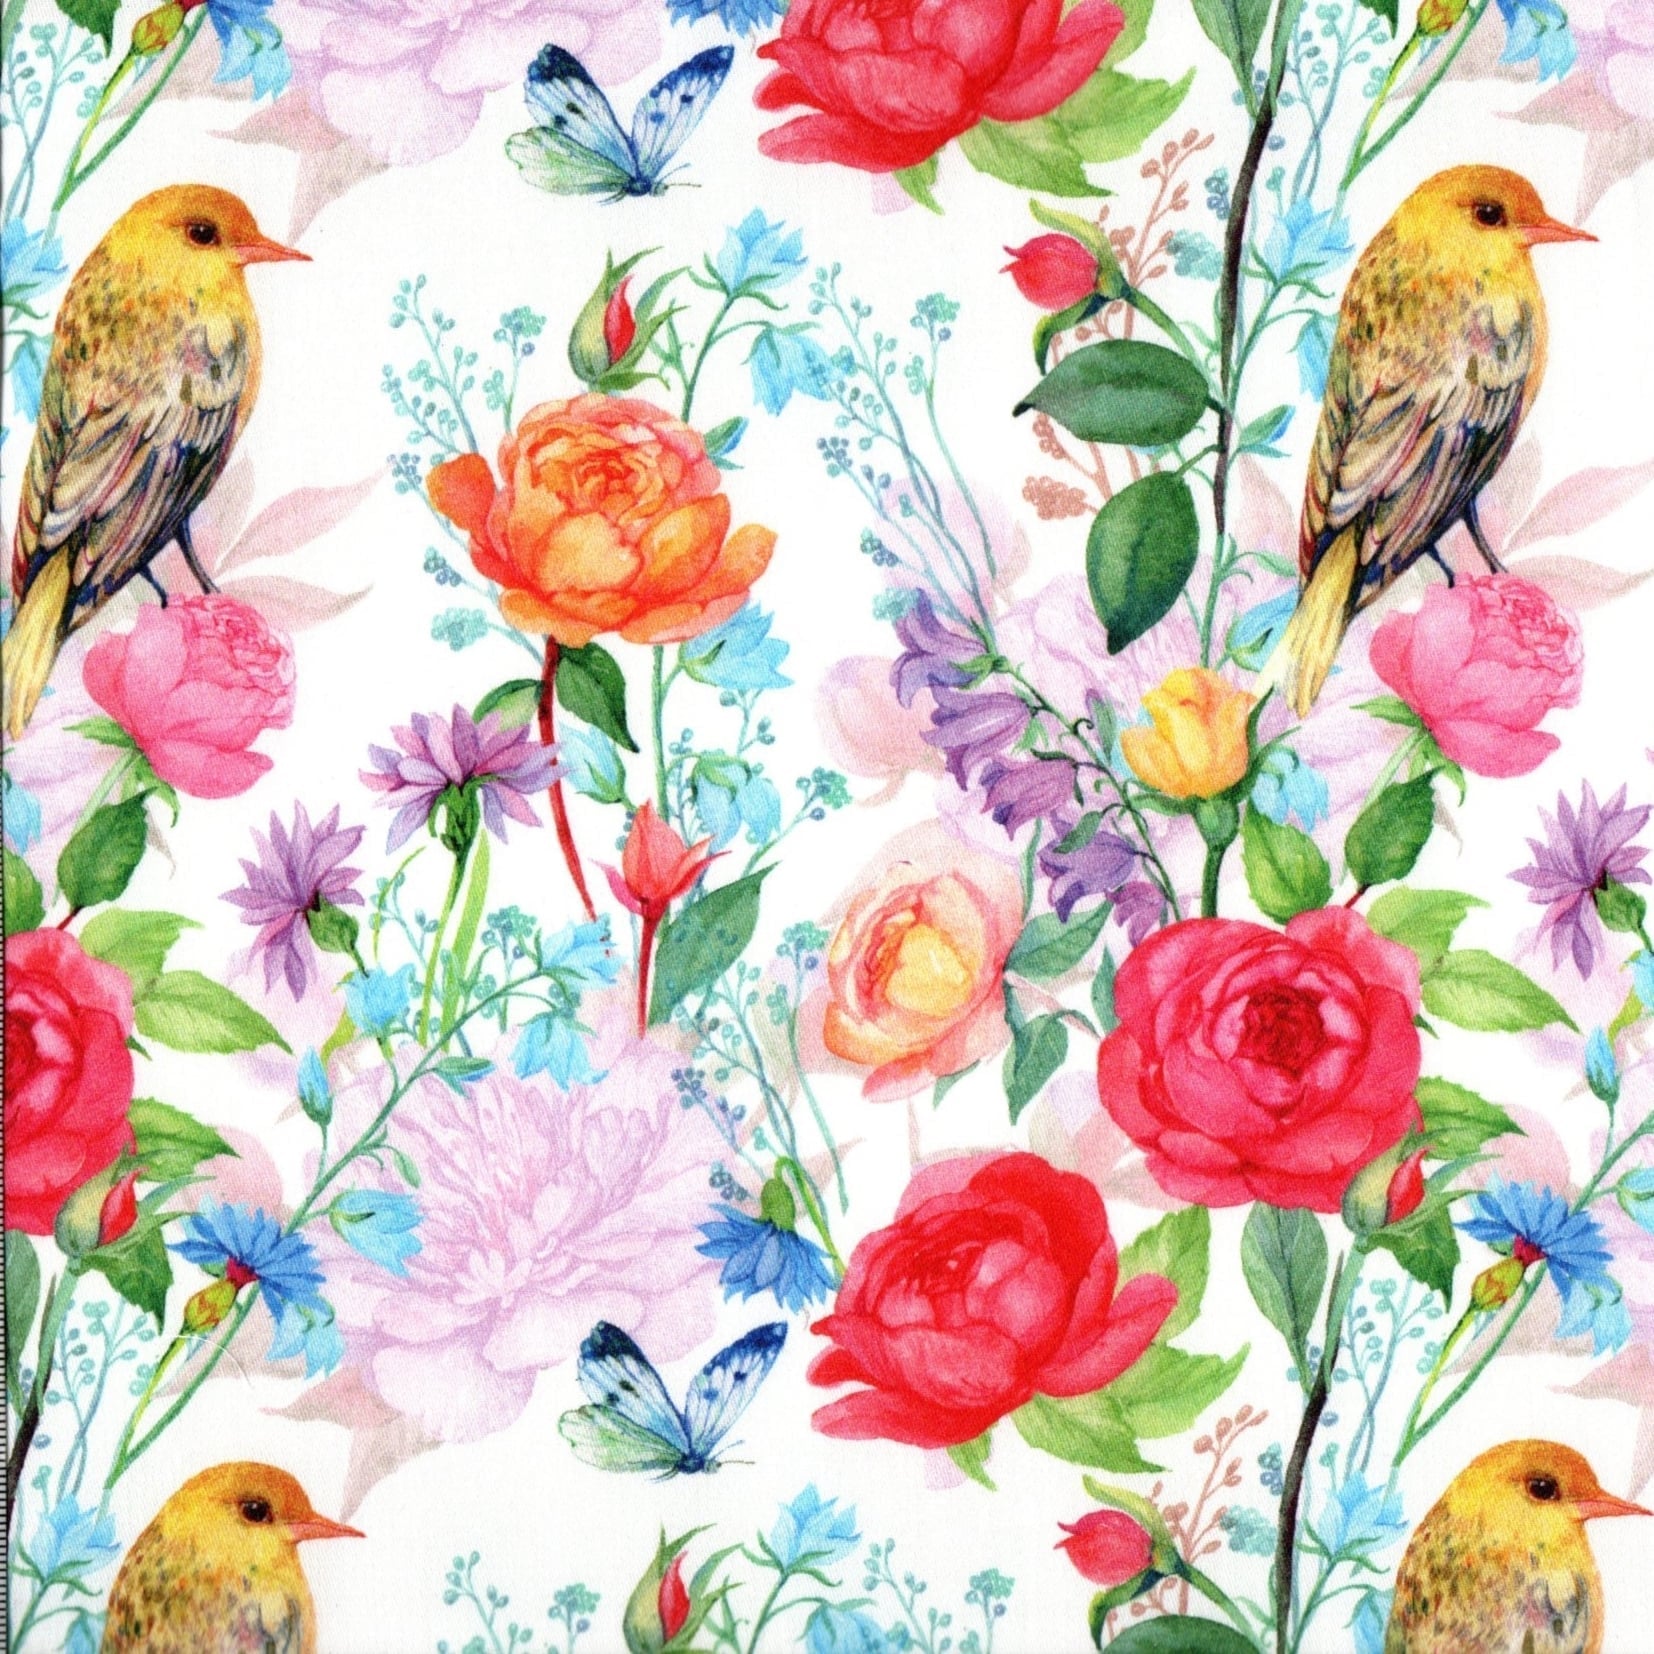 PRE-ORDER Quirky Cotton Birds Flowers Roses Butterflies Floral Animals White (PRE-ORDER QC Nature's Garden)